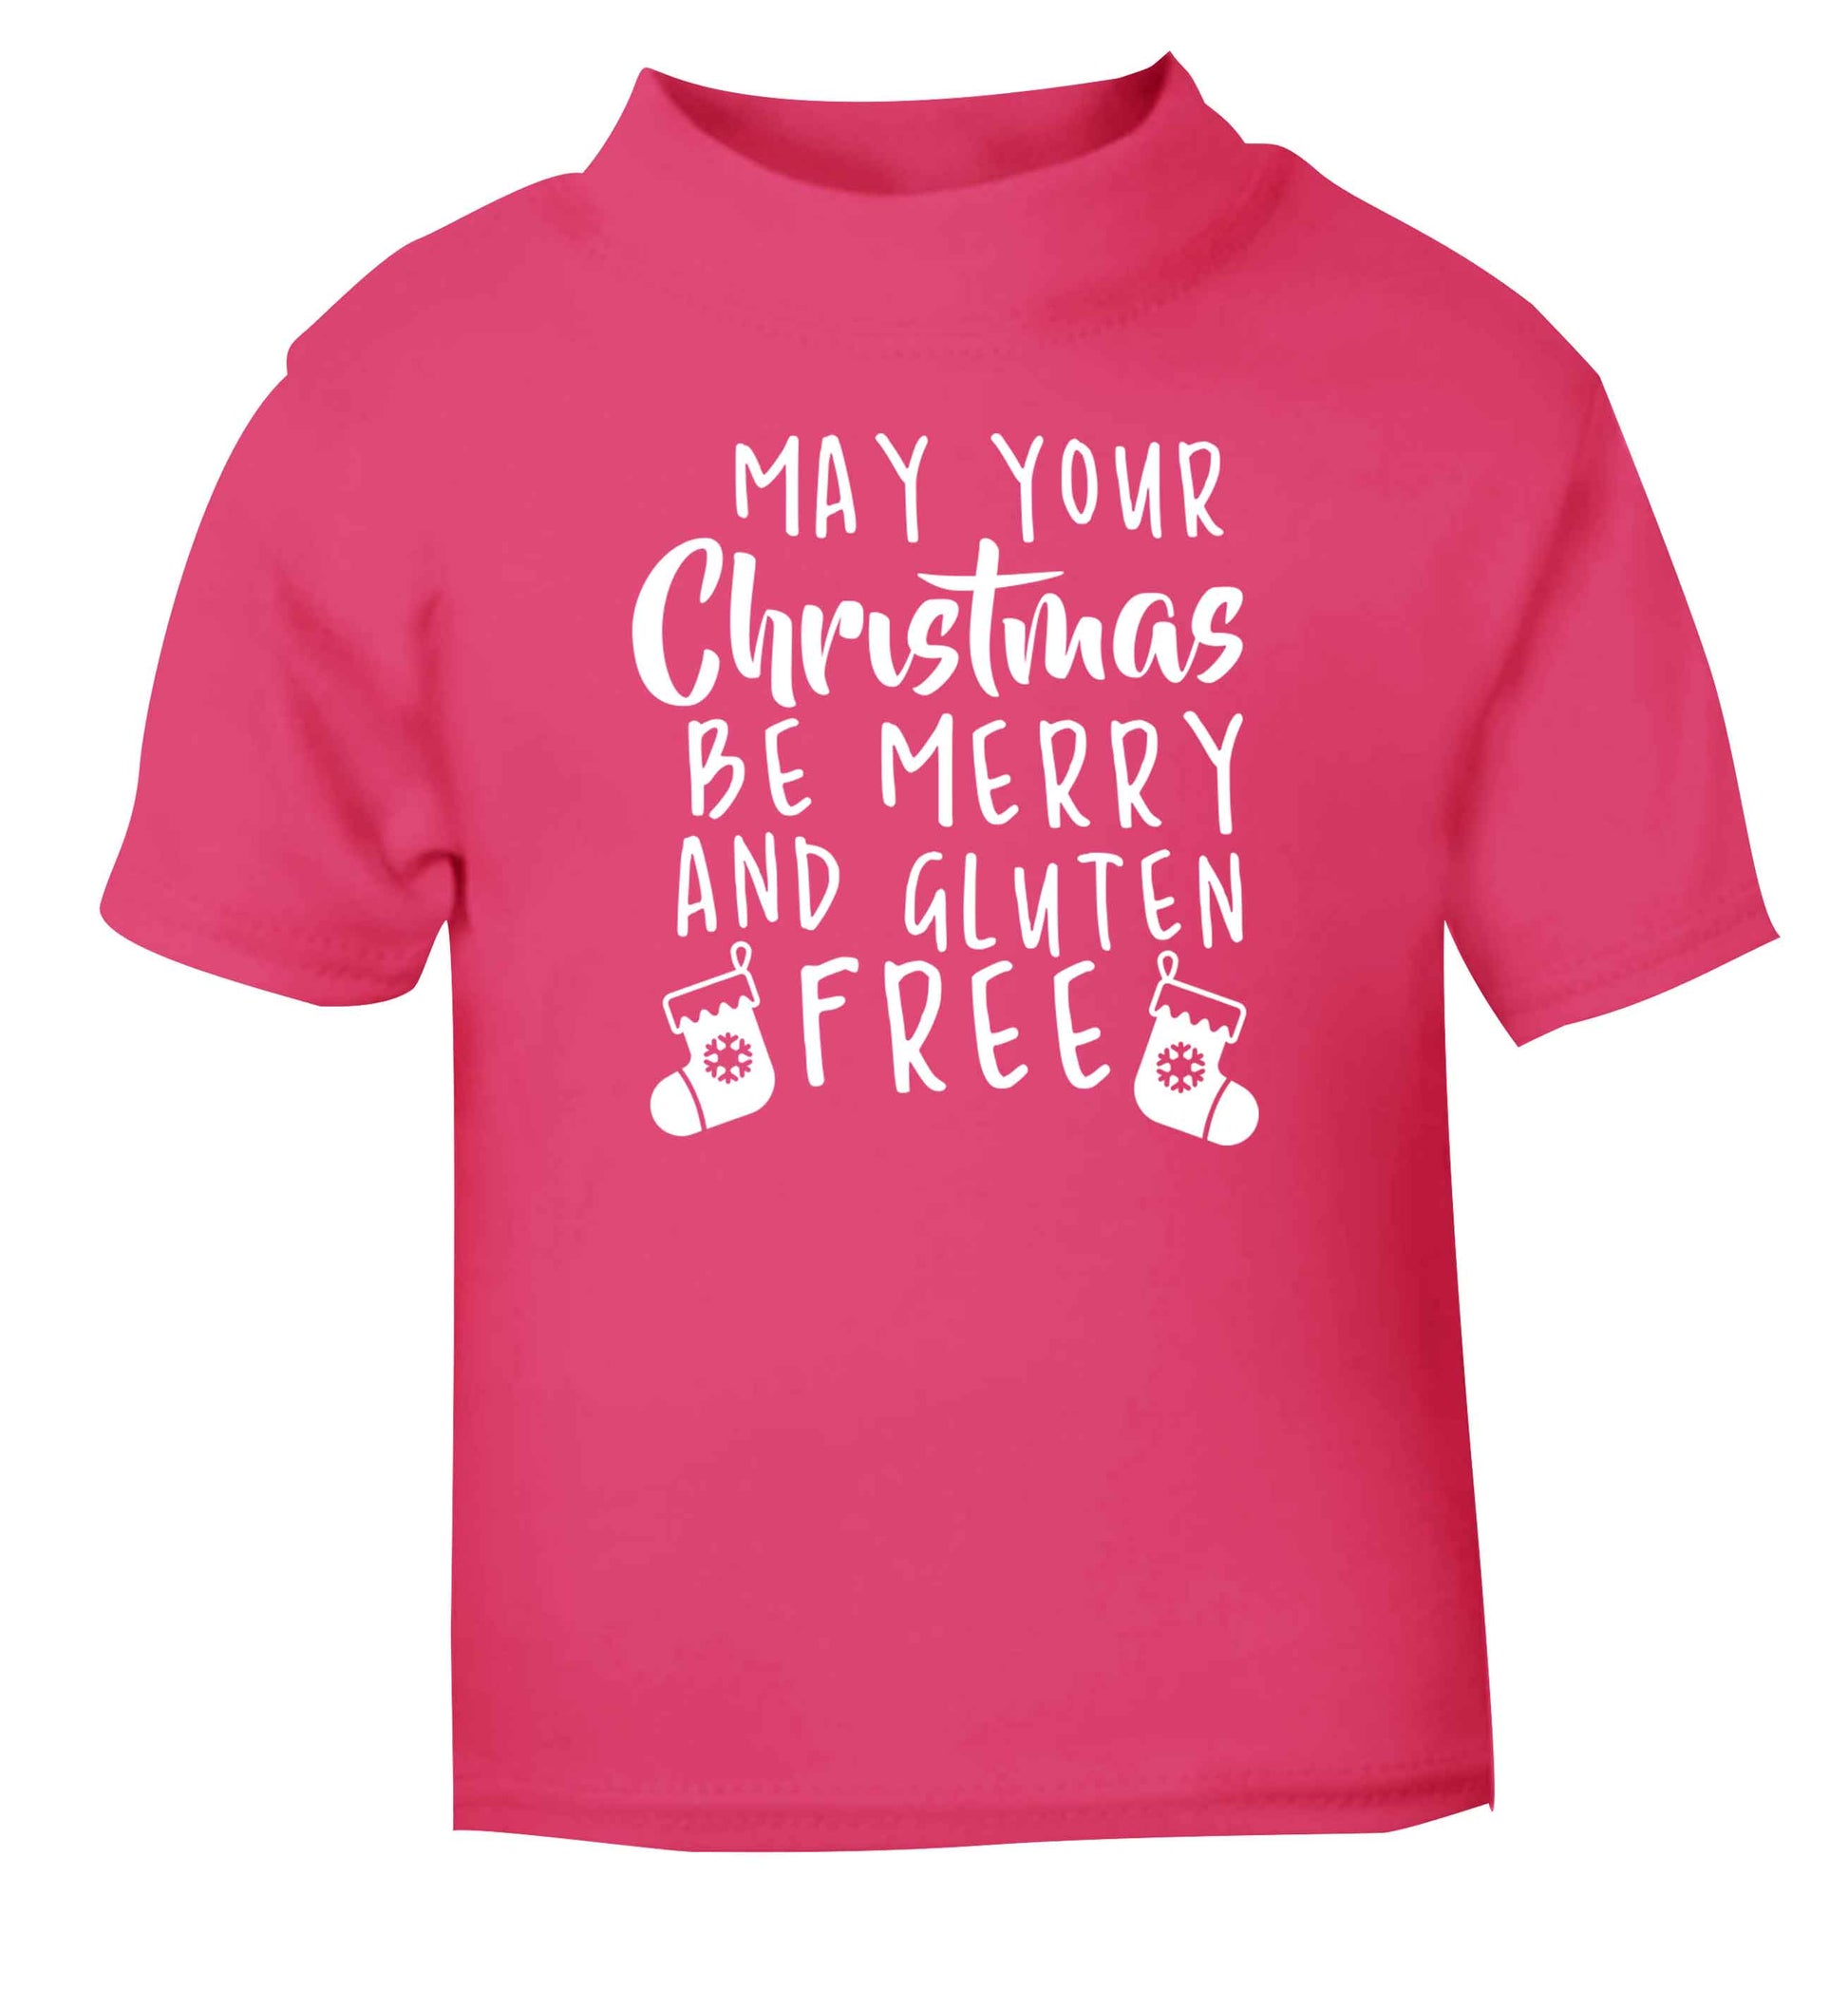 May your Christmas be merry and gluten free pink Baby Toddler Tshirt 2 Years